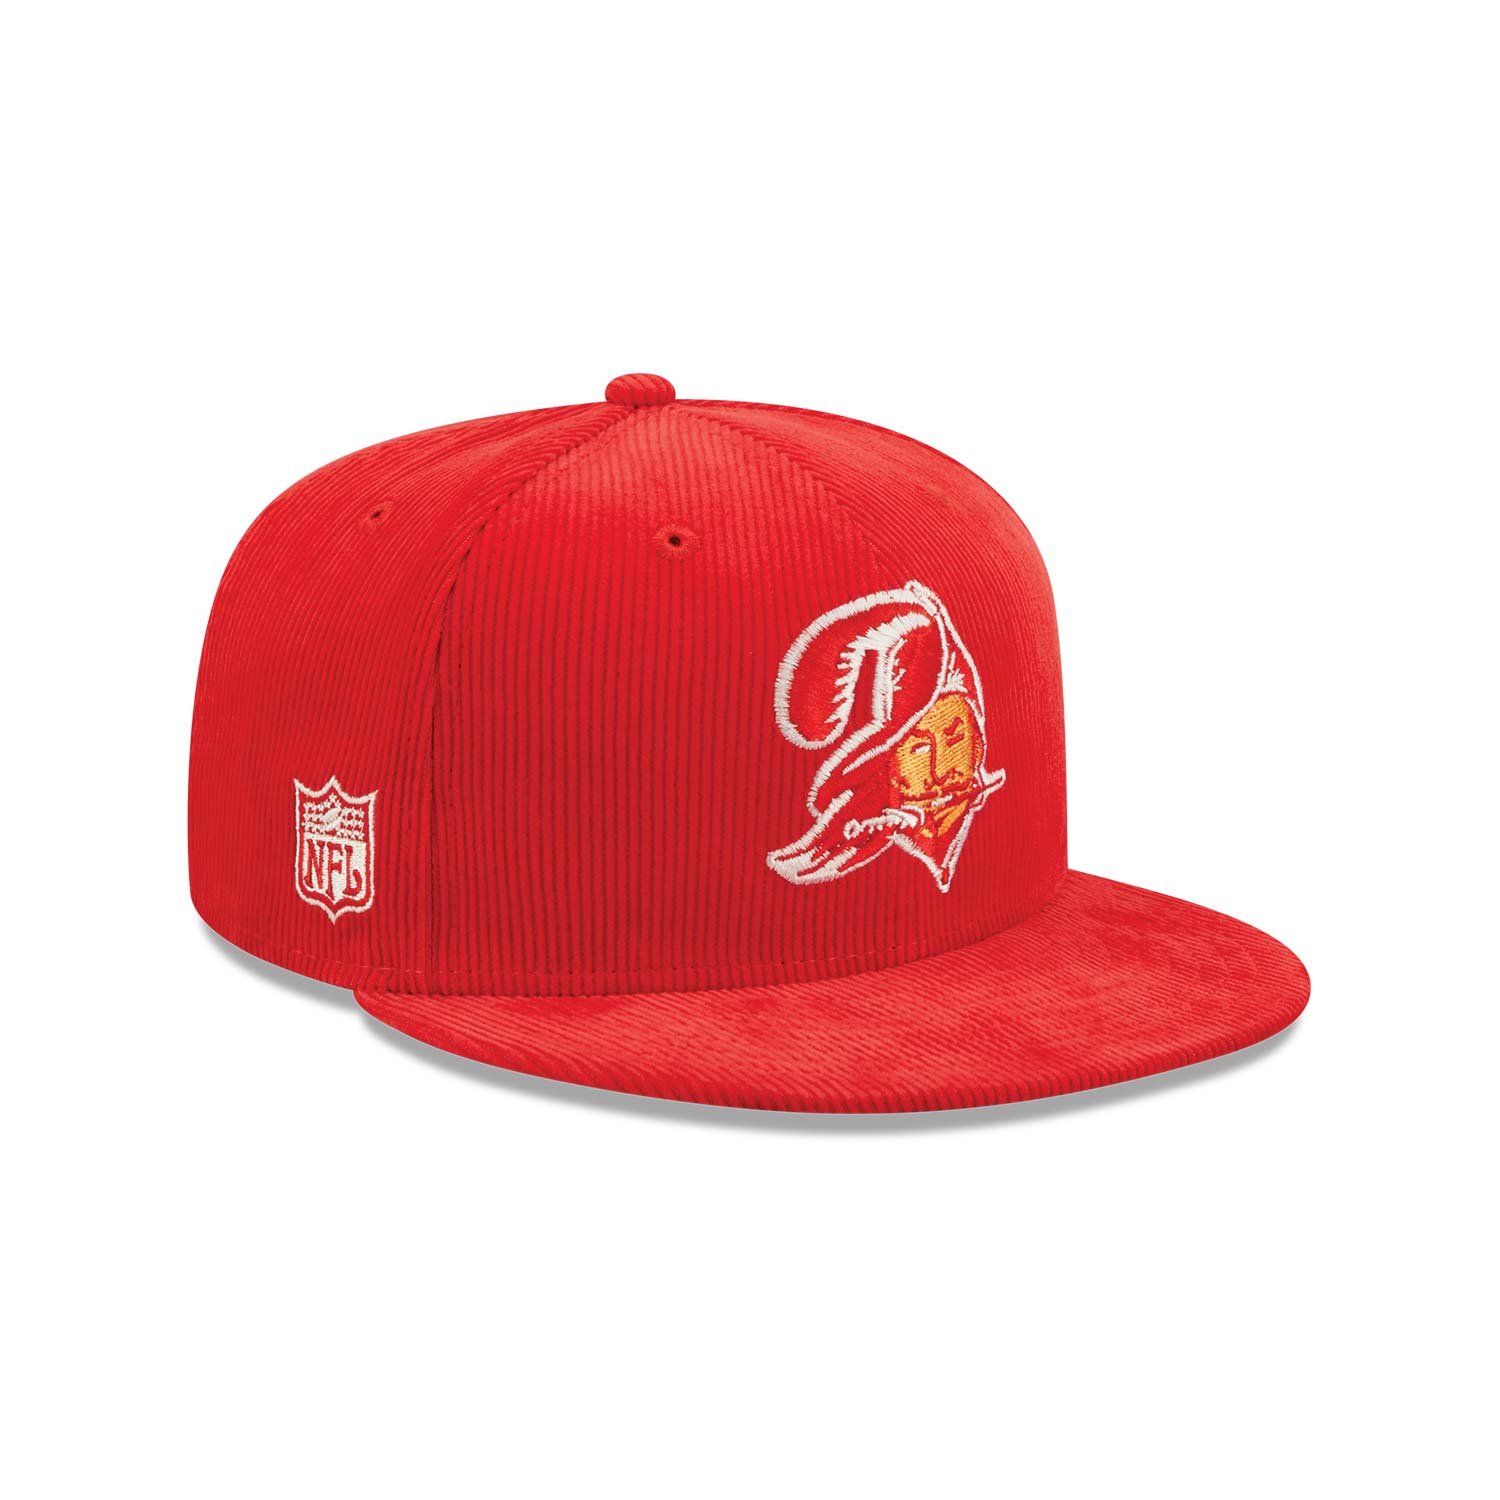 Cappellino 9FIFTY Snapback Tampa Bay Buccaneers NFL Retro Cord Rosso